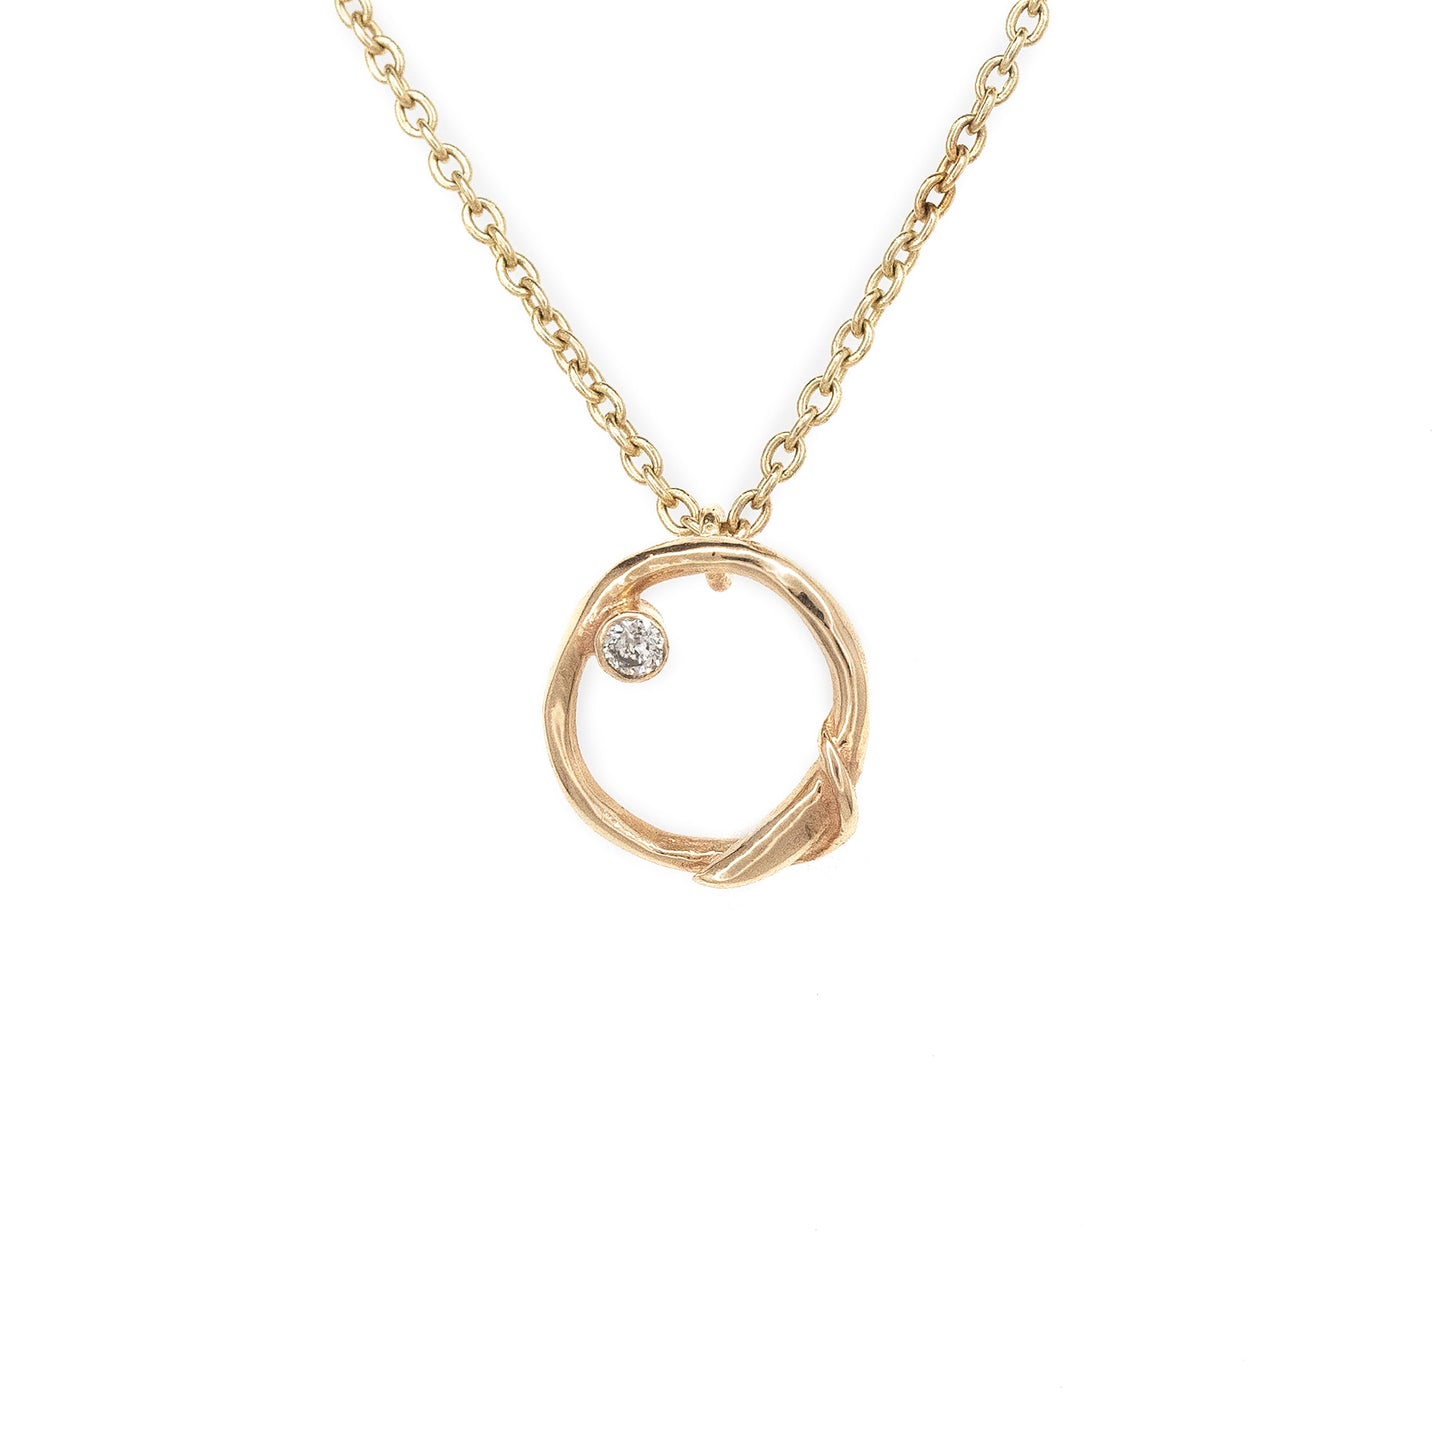 14k Tiny Circle White or Yellow Gold Necklace with Sapphire or Diamond